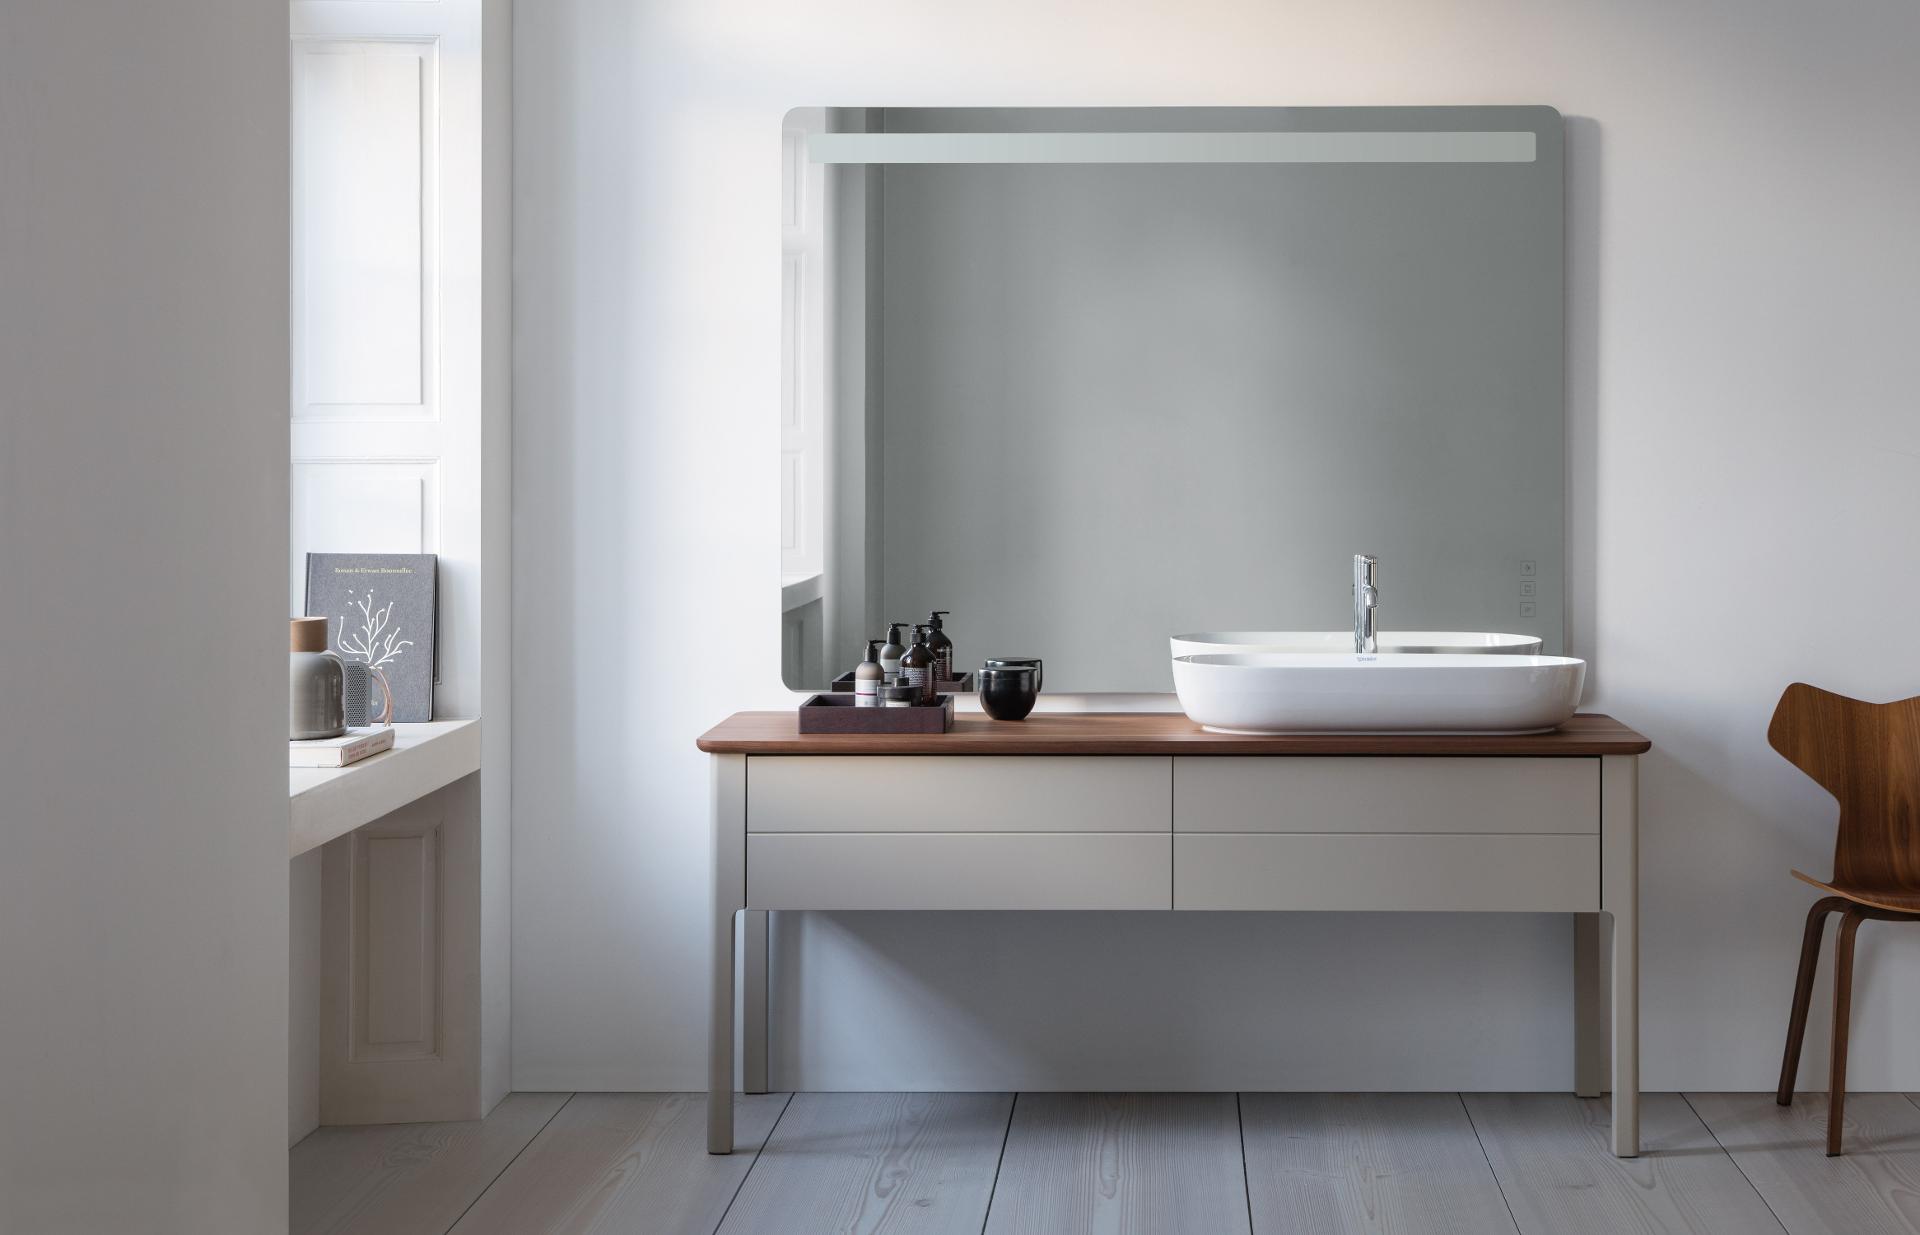 Luv washbasin with washbowl and mirror
